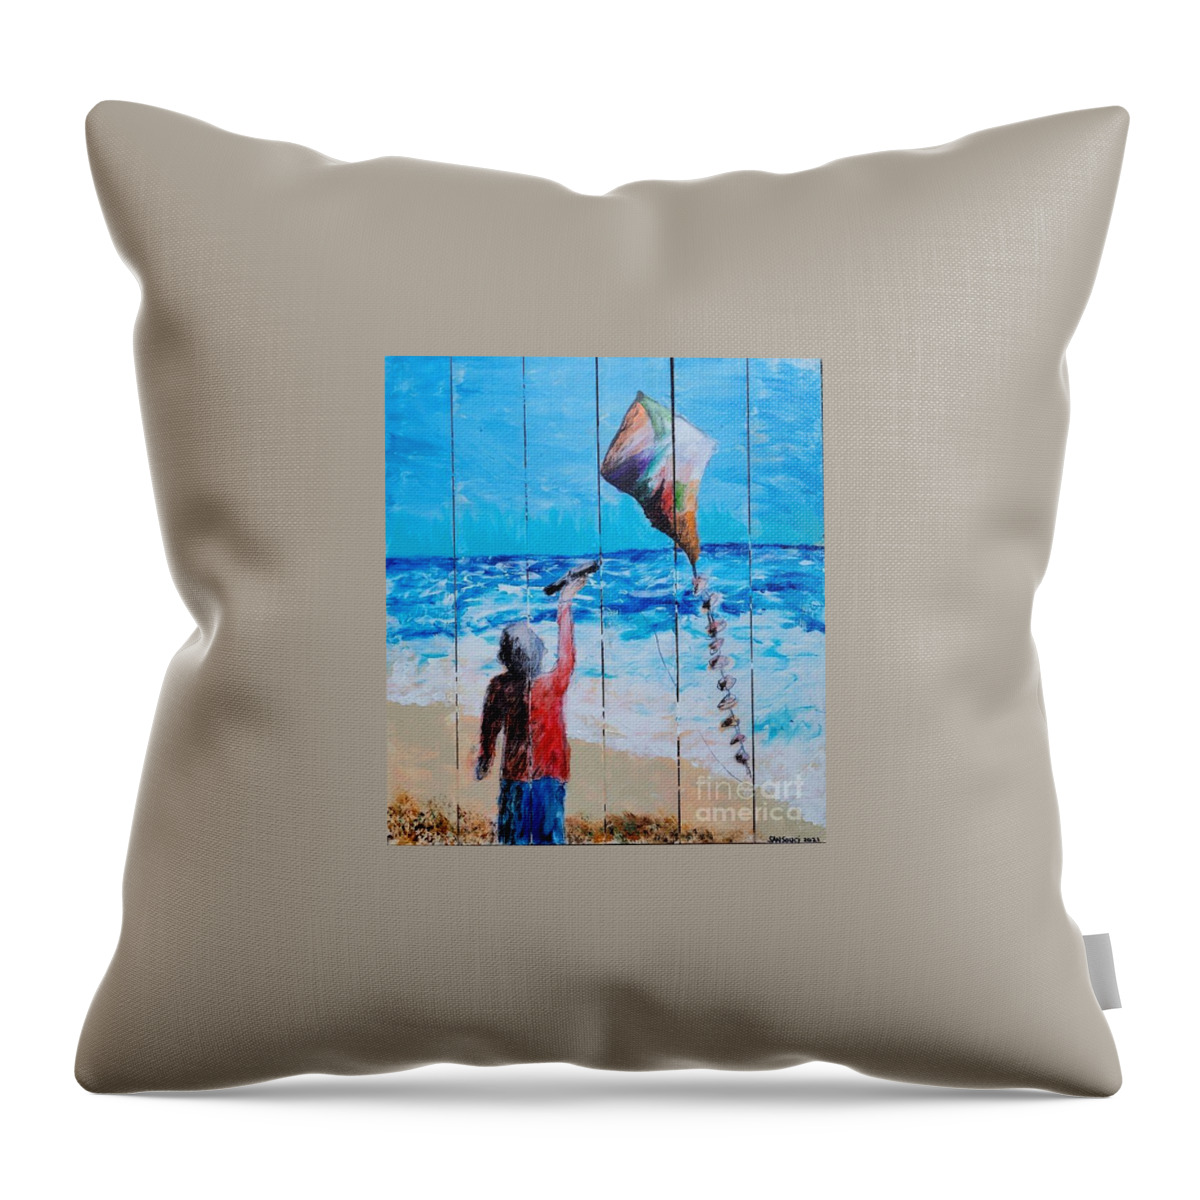  Throw Pillow featuring the painting Round Island Beach Kite Flyer by Mark SanSouci